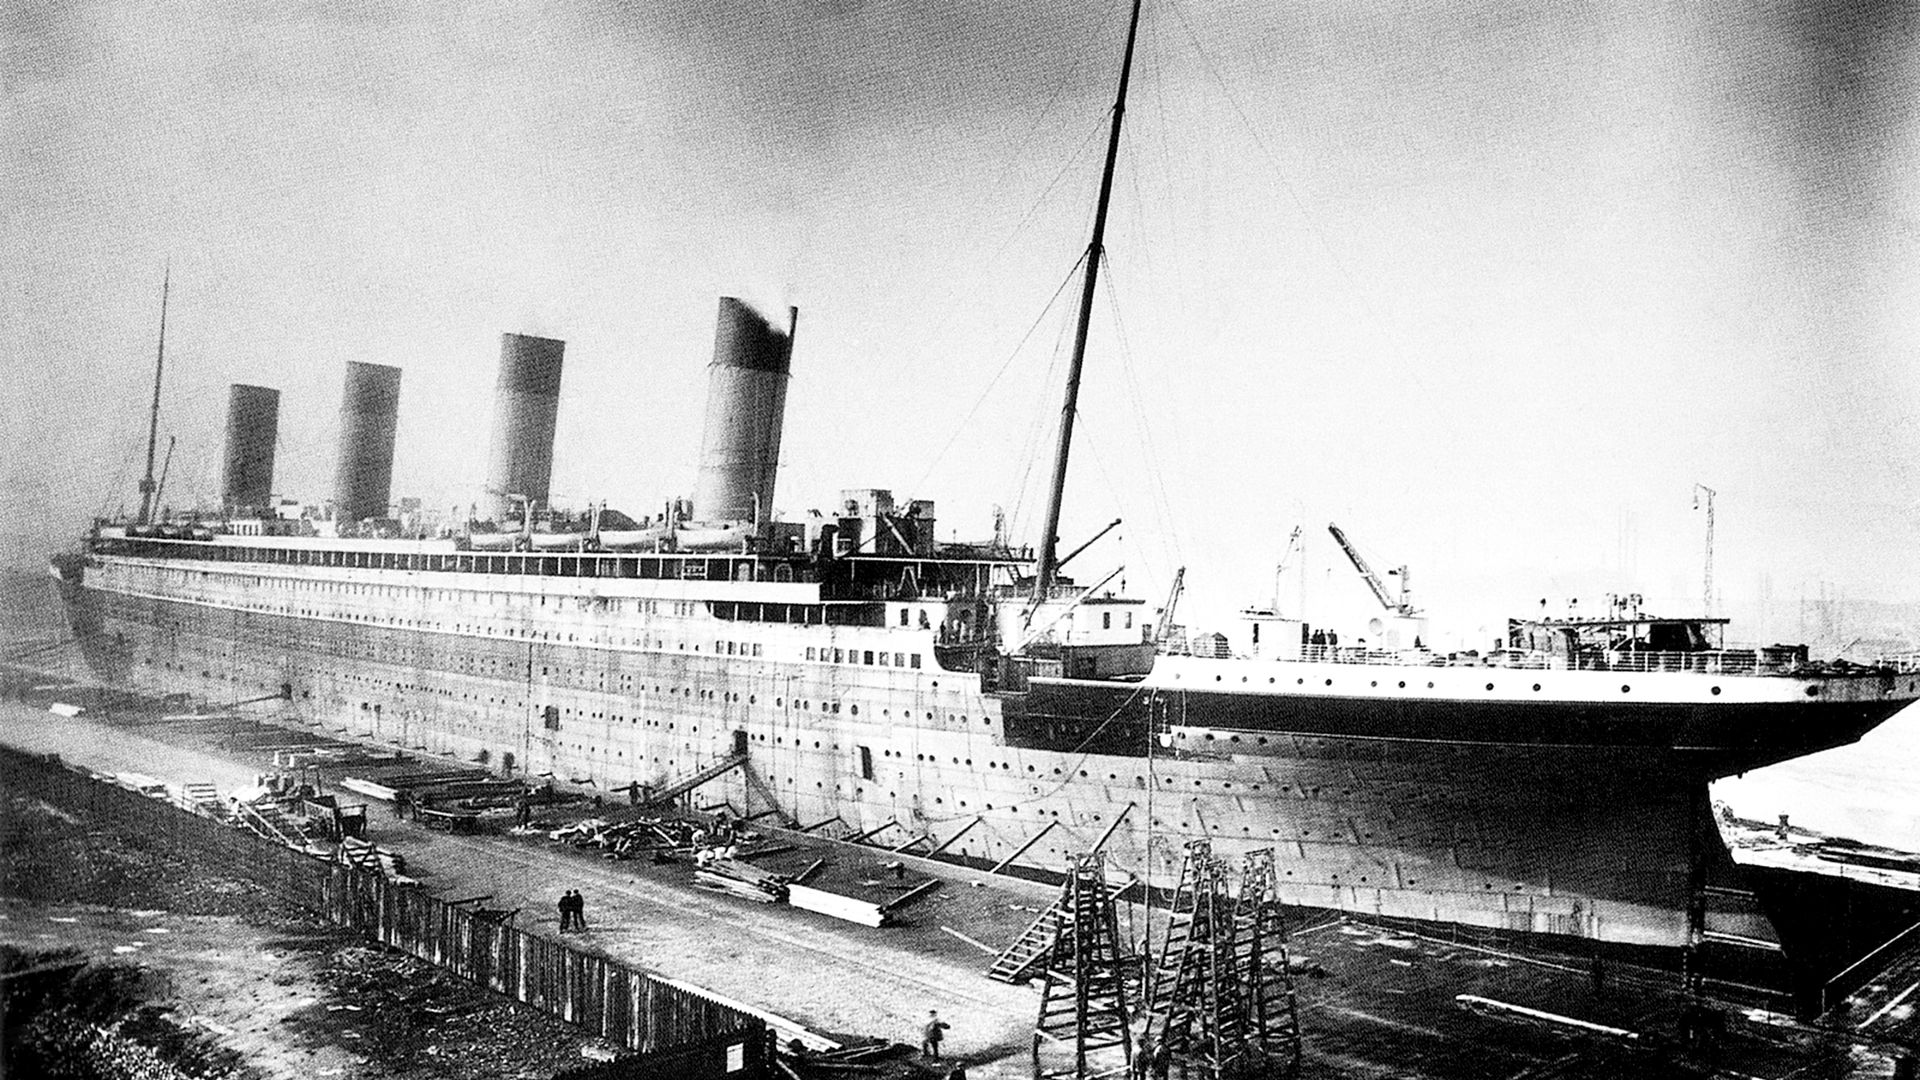 RMS Titanic in Belfast, 1911-1912. Photo: Pictures from History/Universal Images Group via Getty Images